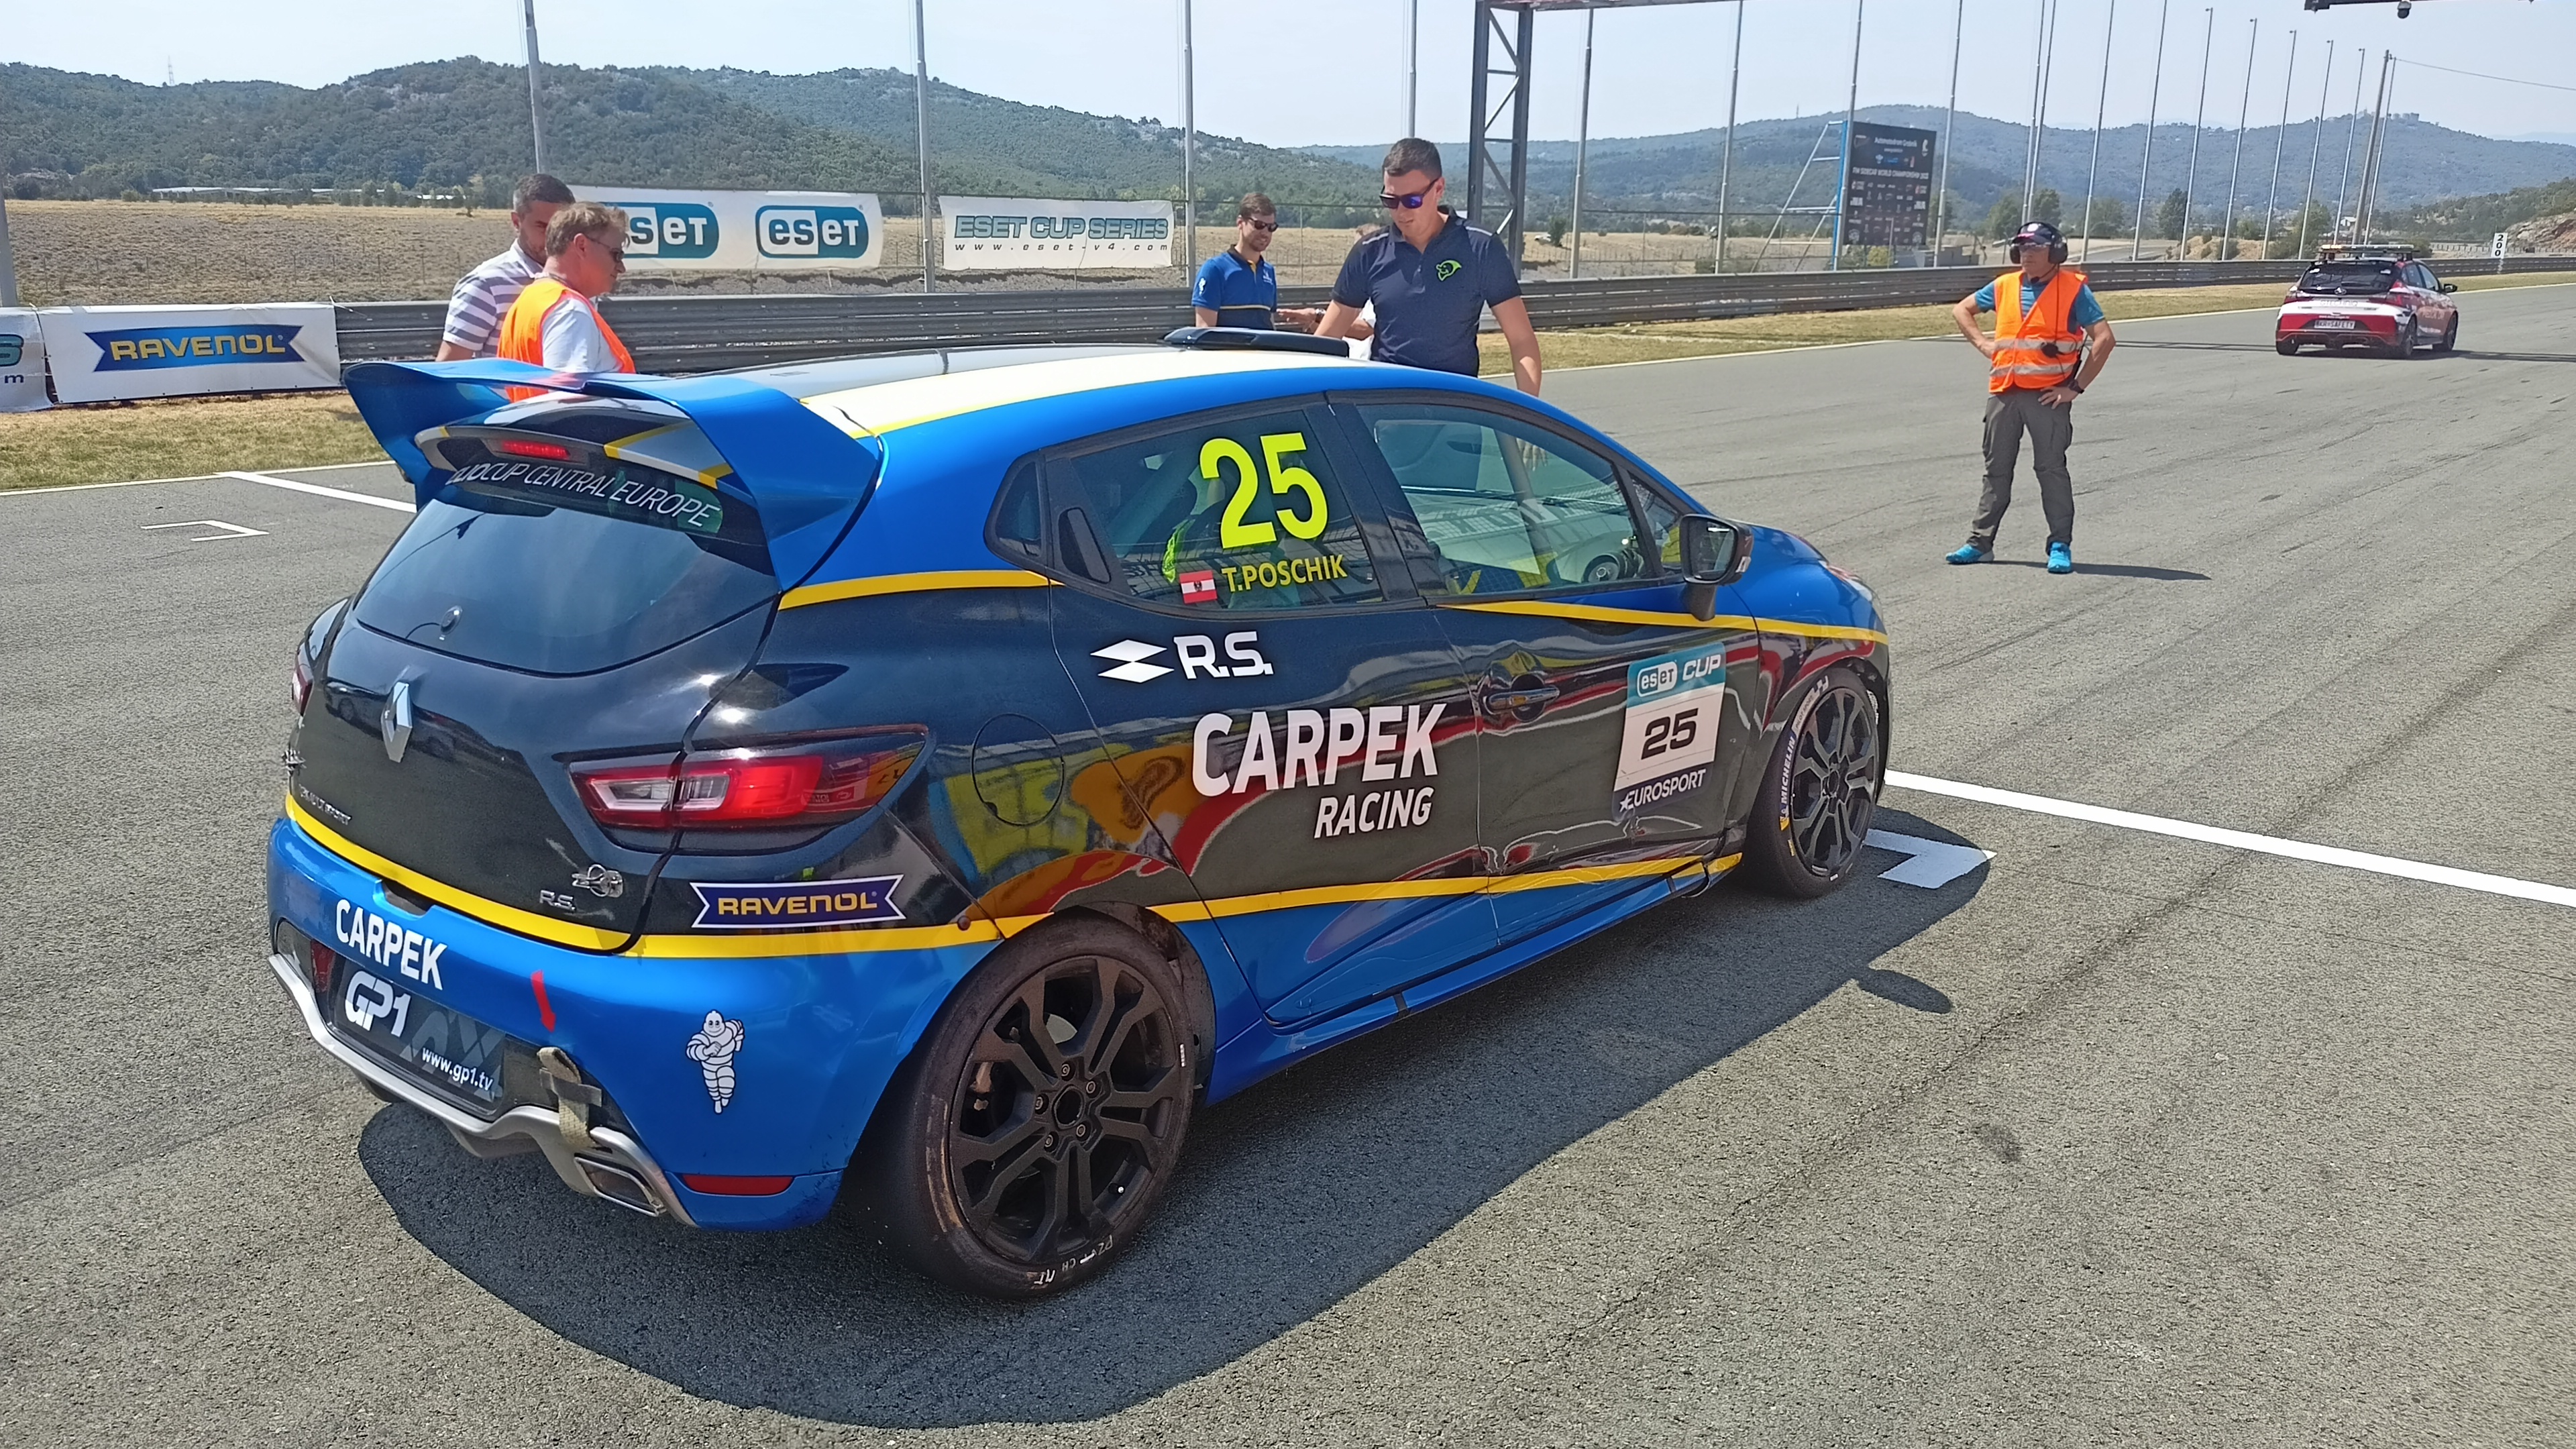 Tobias Poschik increased the lead in the Clio Cup